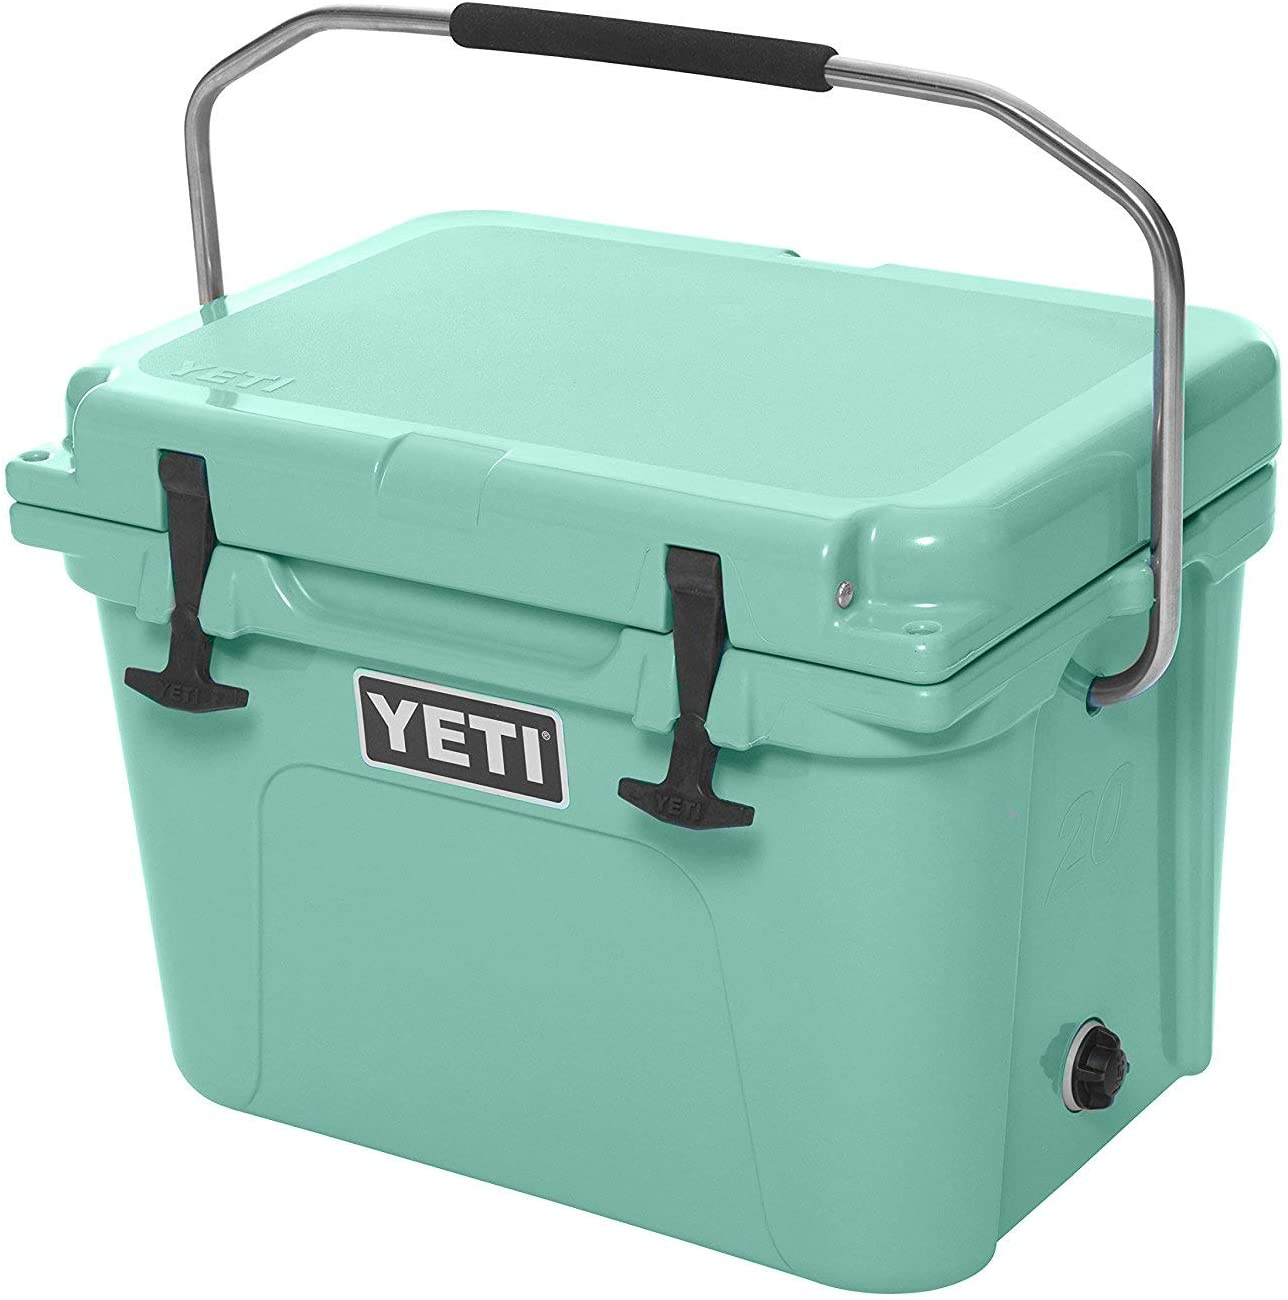 Best Yeti Cooler Sale  Here's Where to Get the Hottest Deals